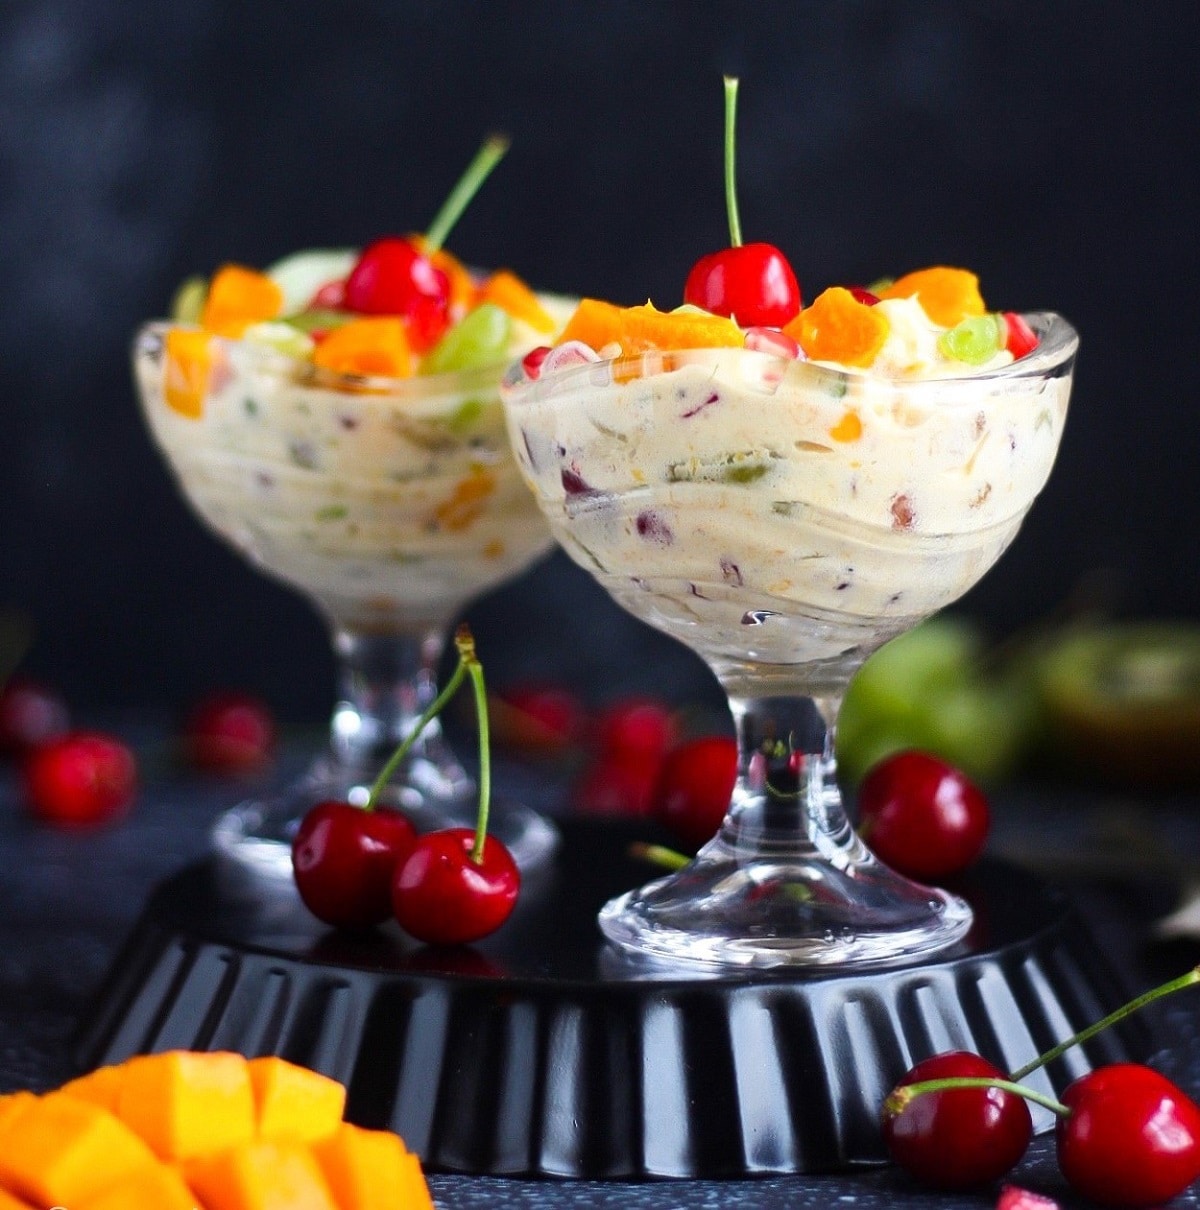 Images Of Fruit Salad With Ice Cream